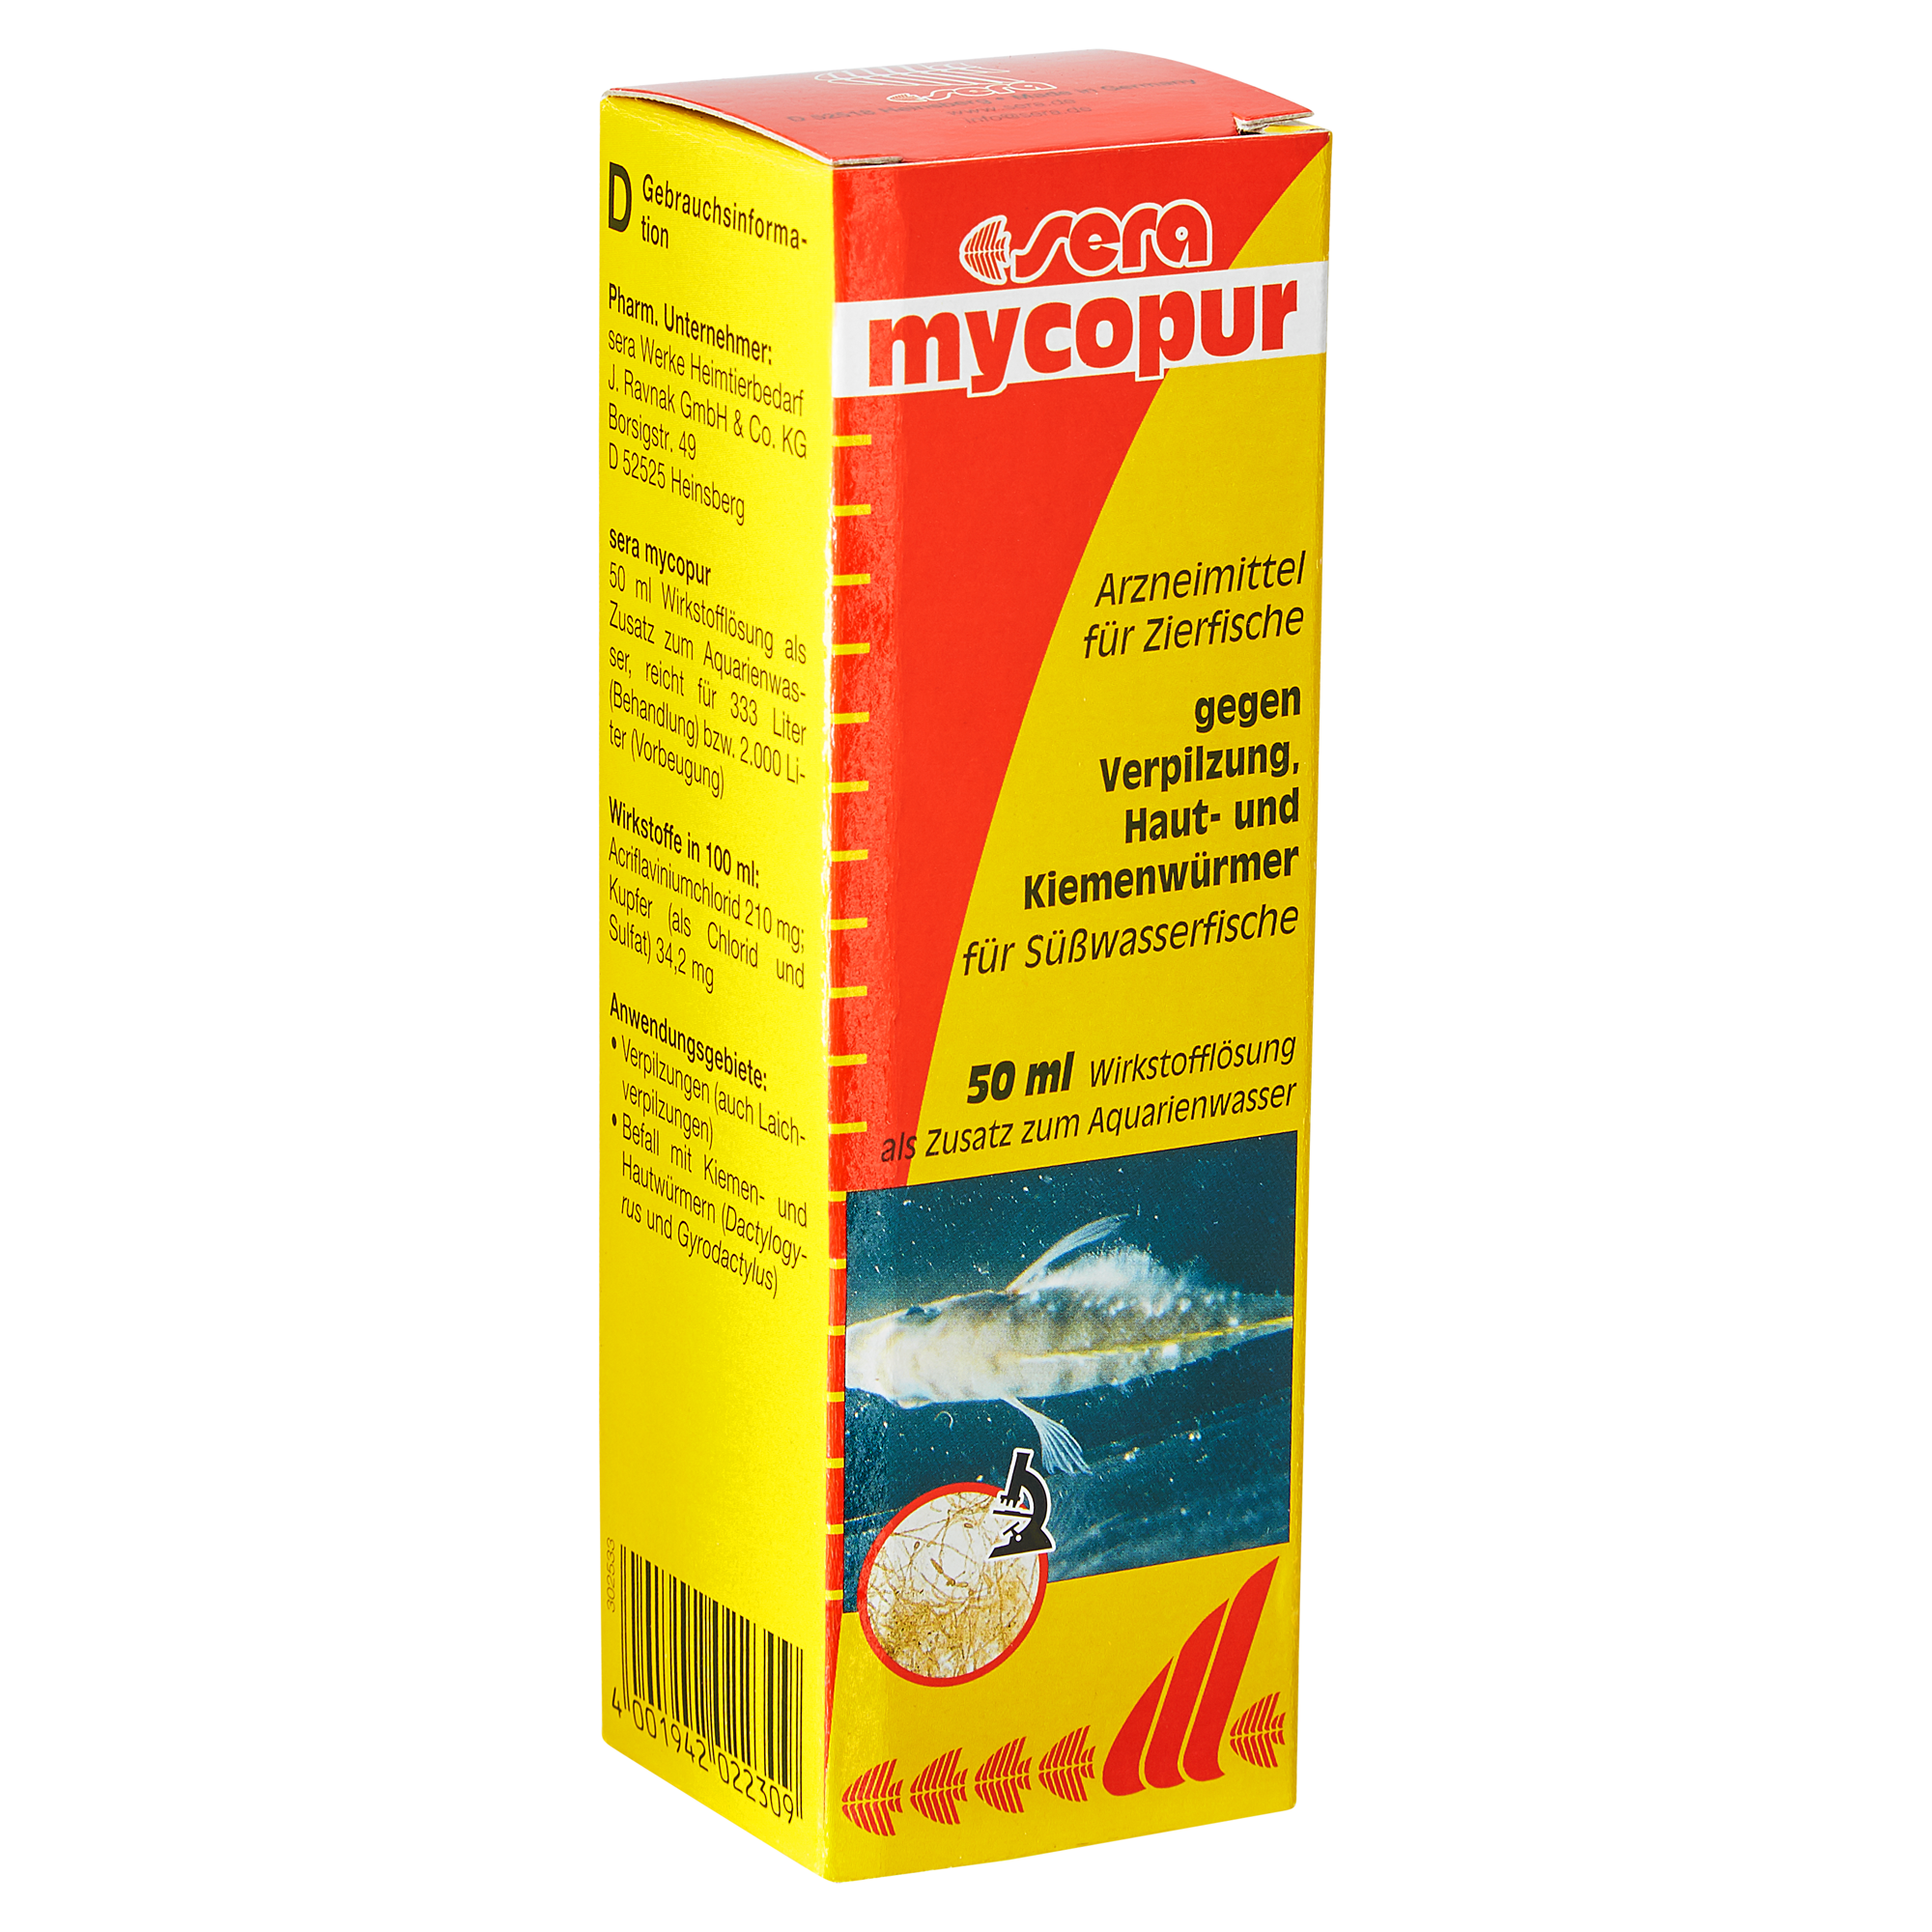 Fischarznei "Mycopur" 50 ml + product picture